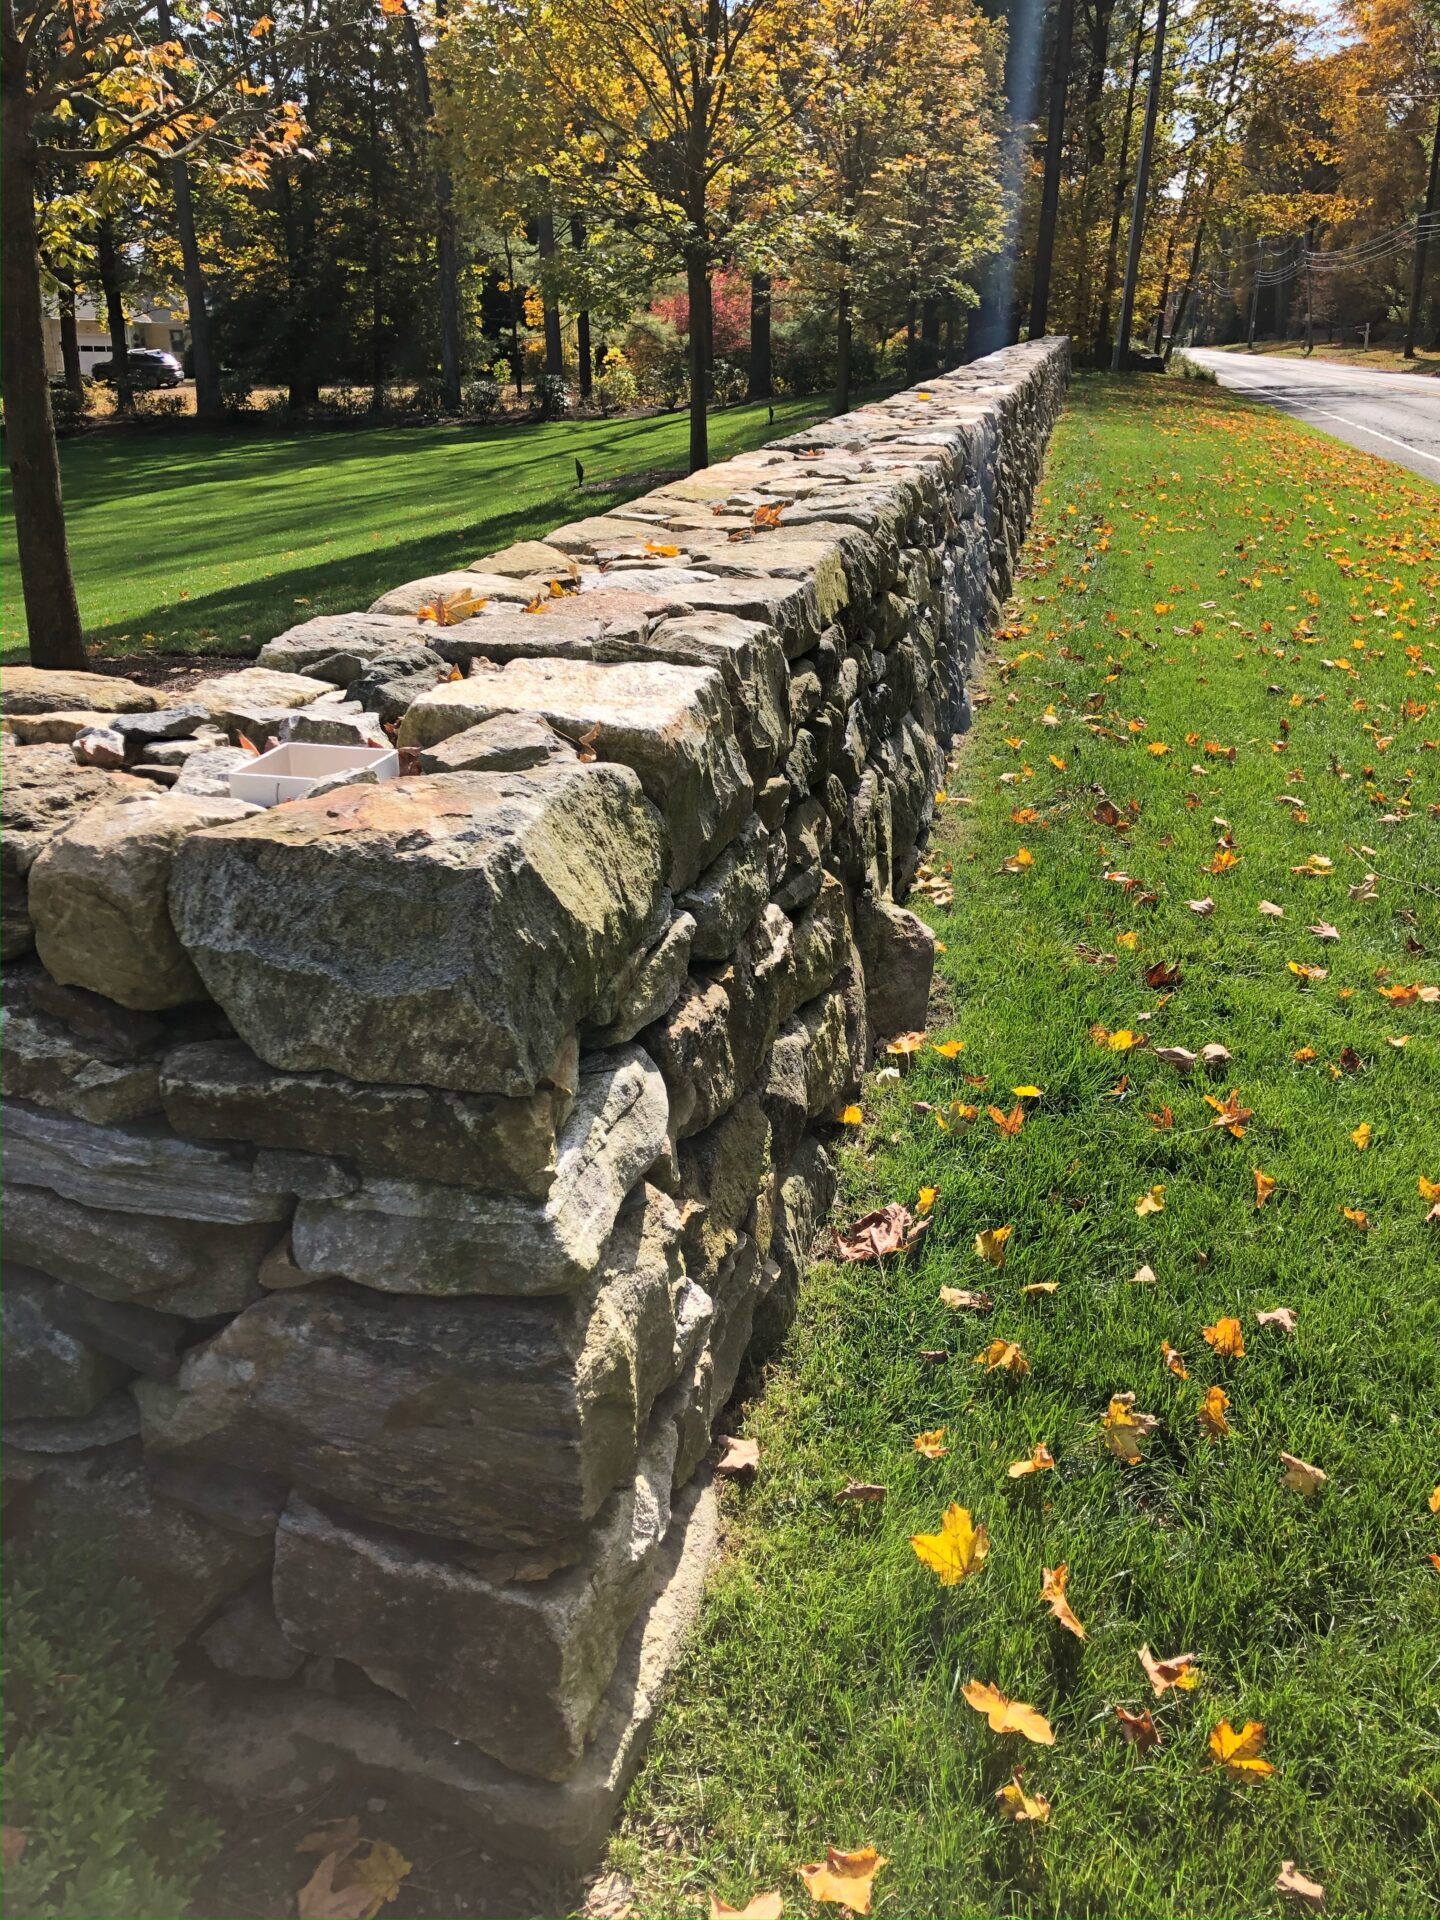 A stone wall stretches alongside a road with a grassy verge. Autumn leaves dot the ground under a bright, sunny sky. Trees display fall colors.